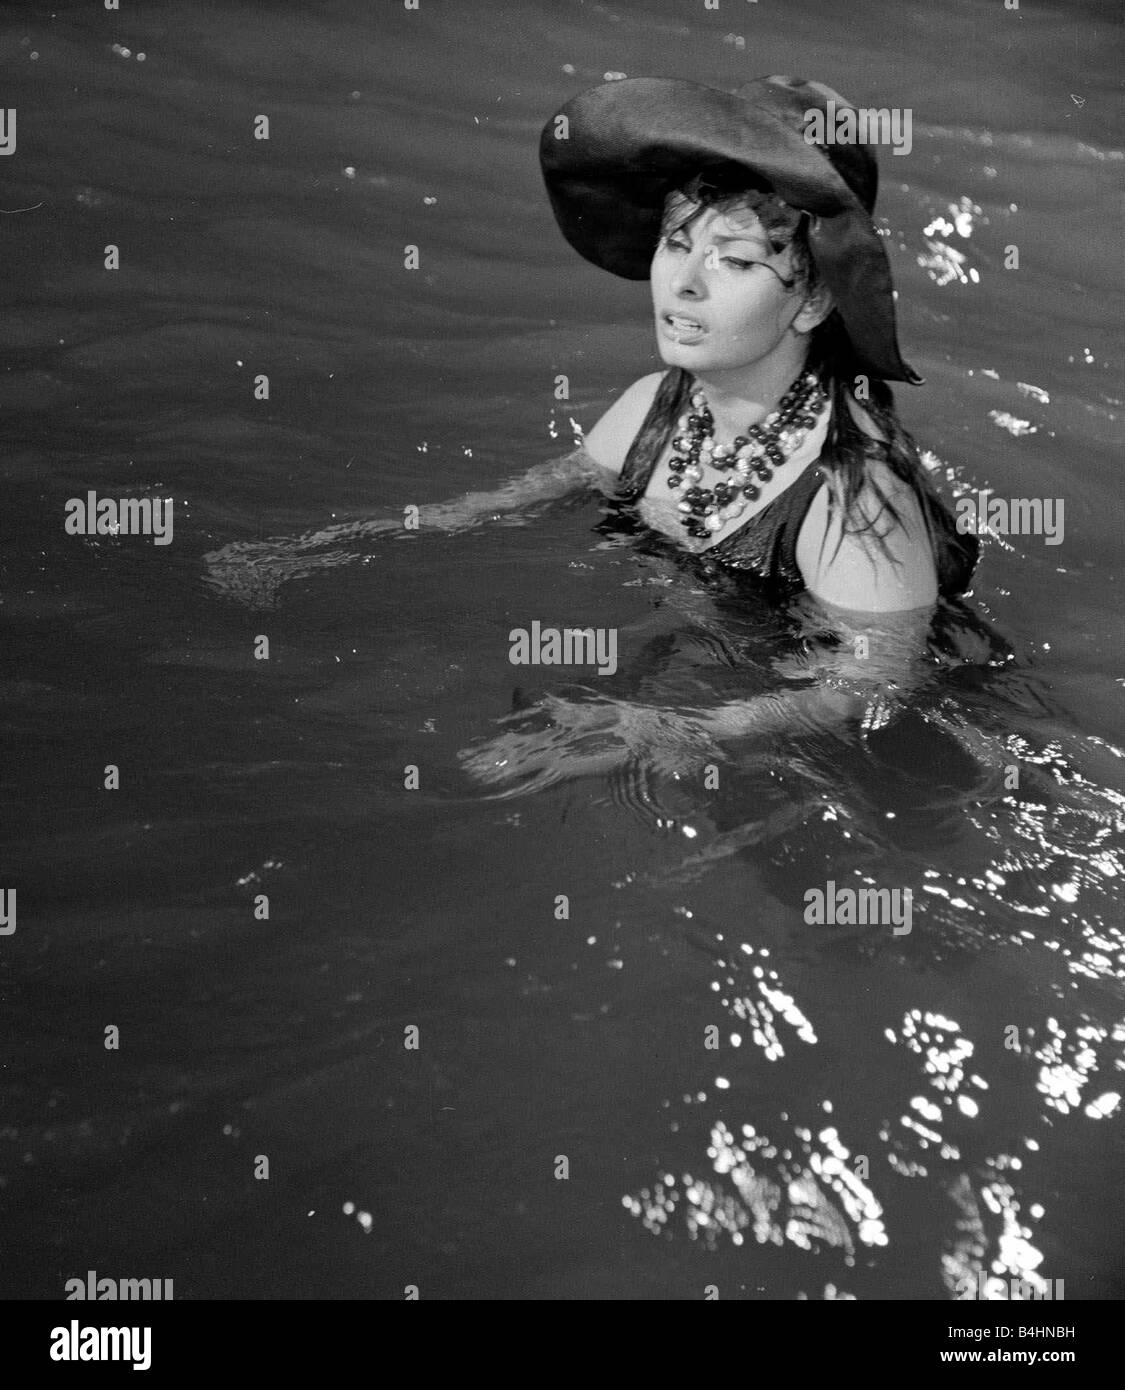 The making of The Millionairess Film July 1960 Pictured Sophia Loren Italian Actress in water during filming Plot Summary When her father dies Epifania Parerga an Italian in London becomes the world s richest woman She feels incomplete without a husband and falls in love with a humble Indian physician Dr Ahmed el Kabir Peter Sellers Stock Photo